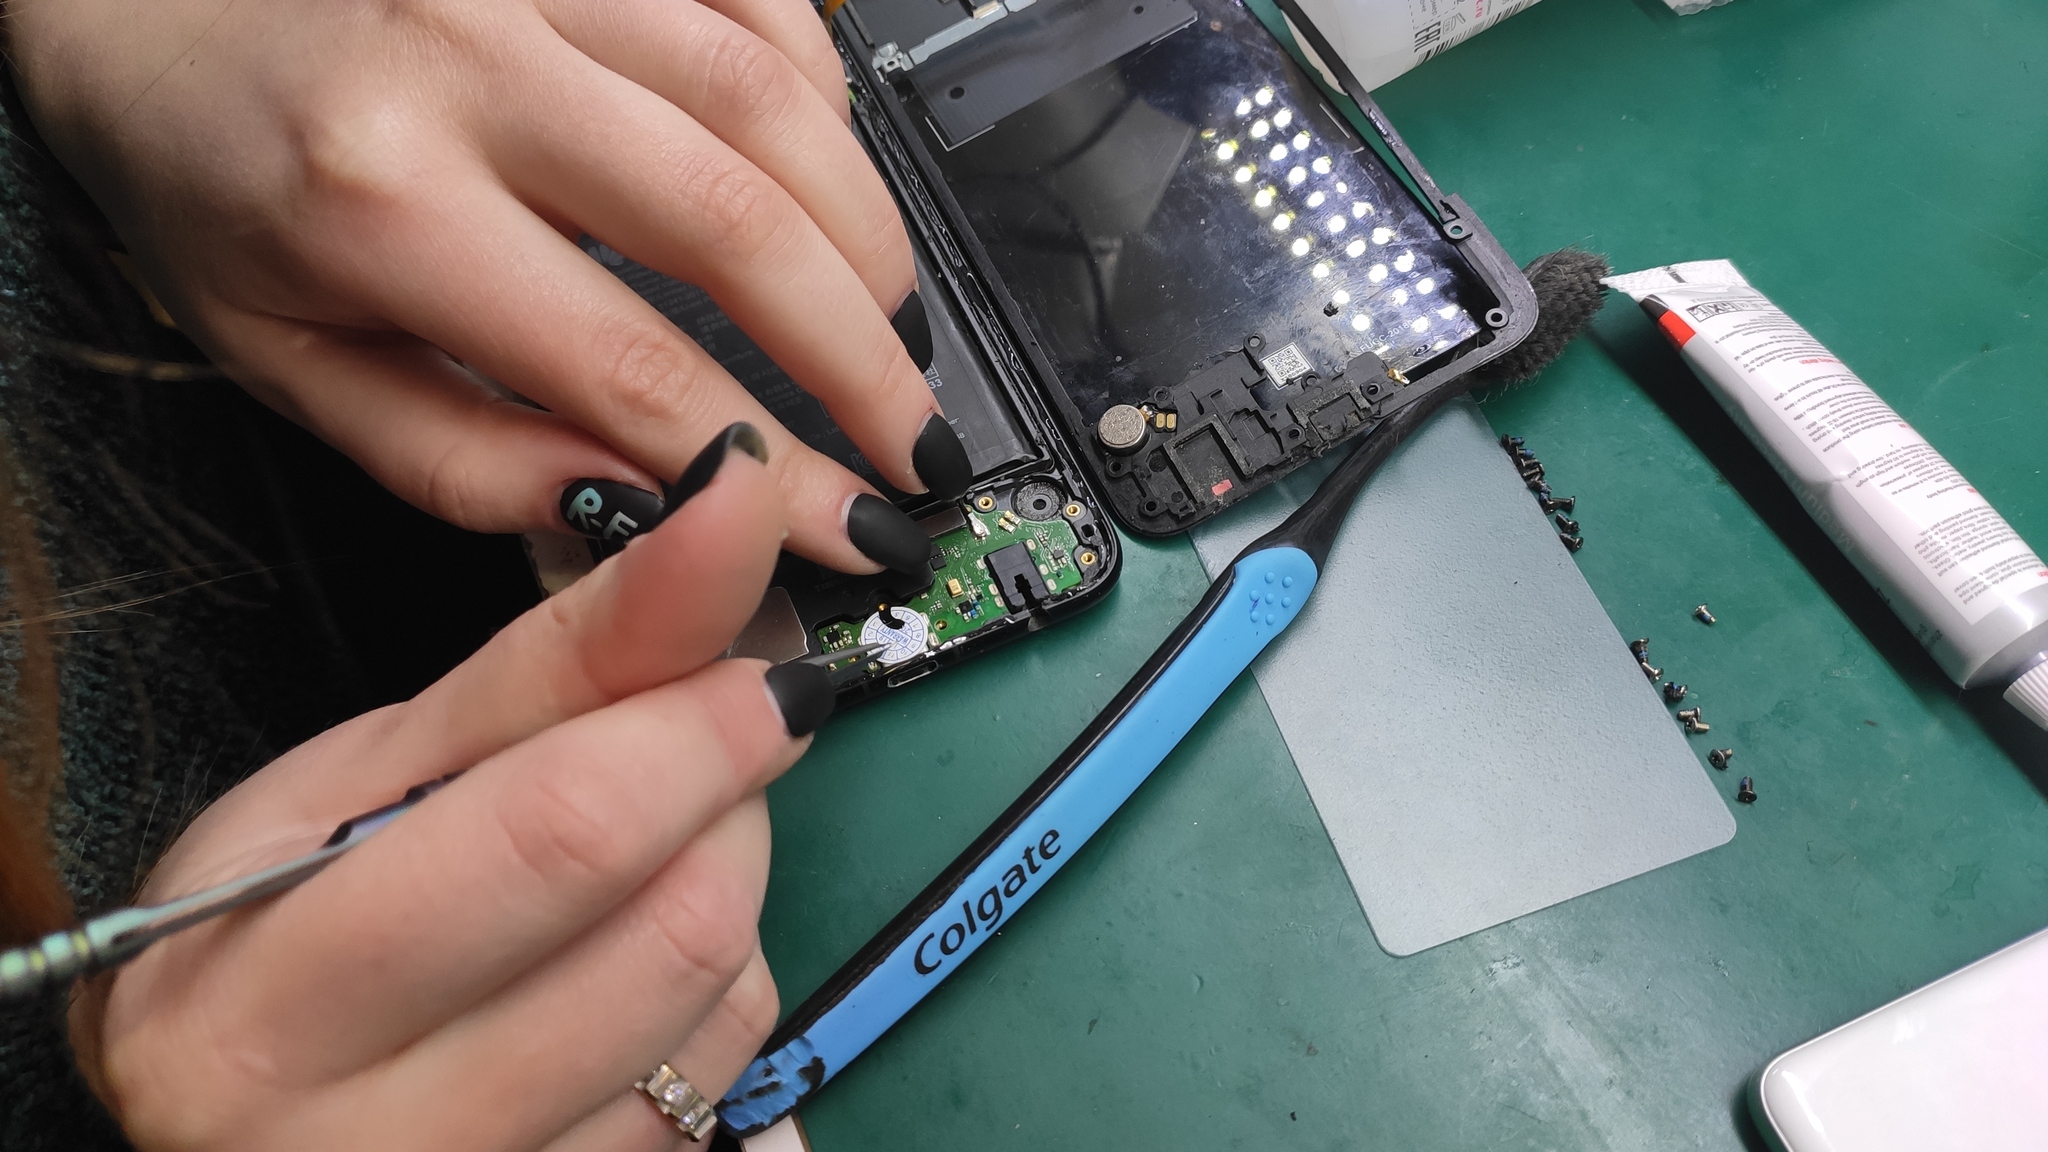 R-Fon has a second side. Post from R-Fon - My, First post, Connector replacement, Girls, Ремонт телефона, Soldering, Moscow, Longpost